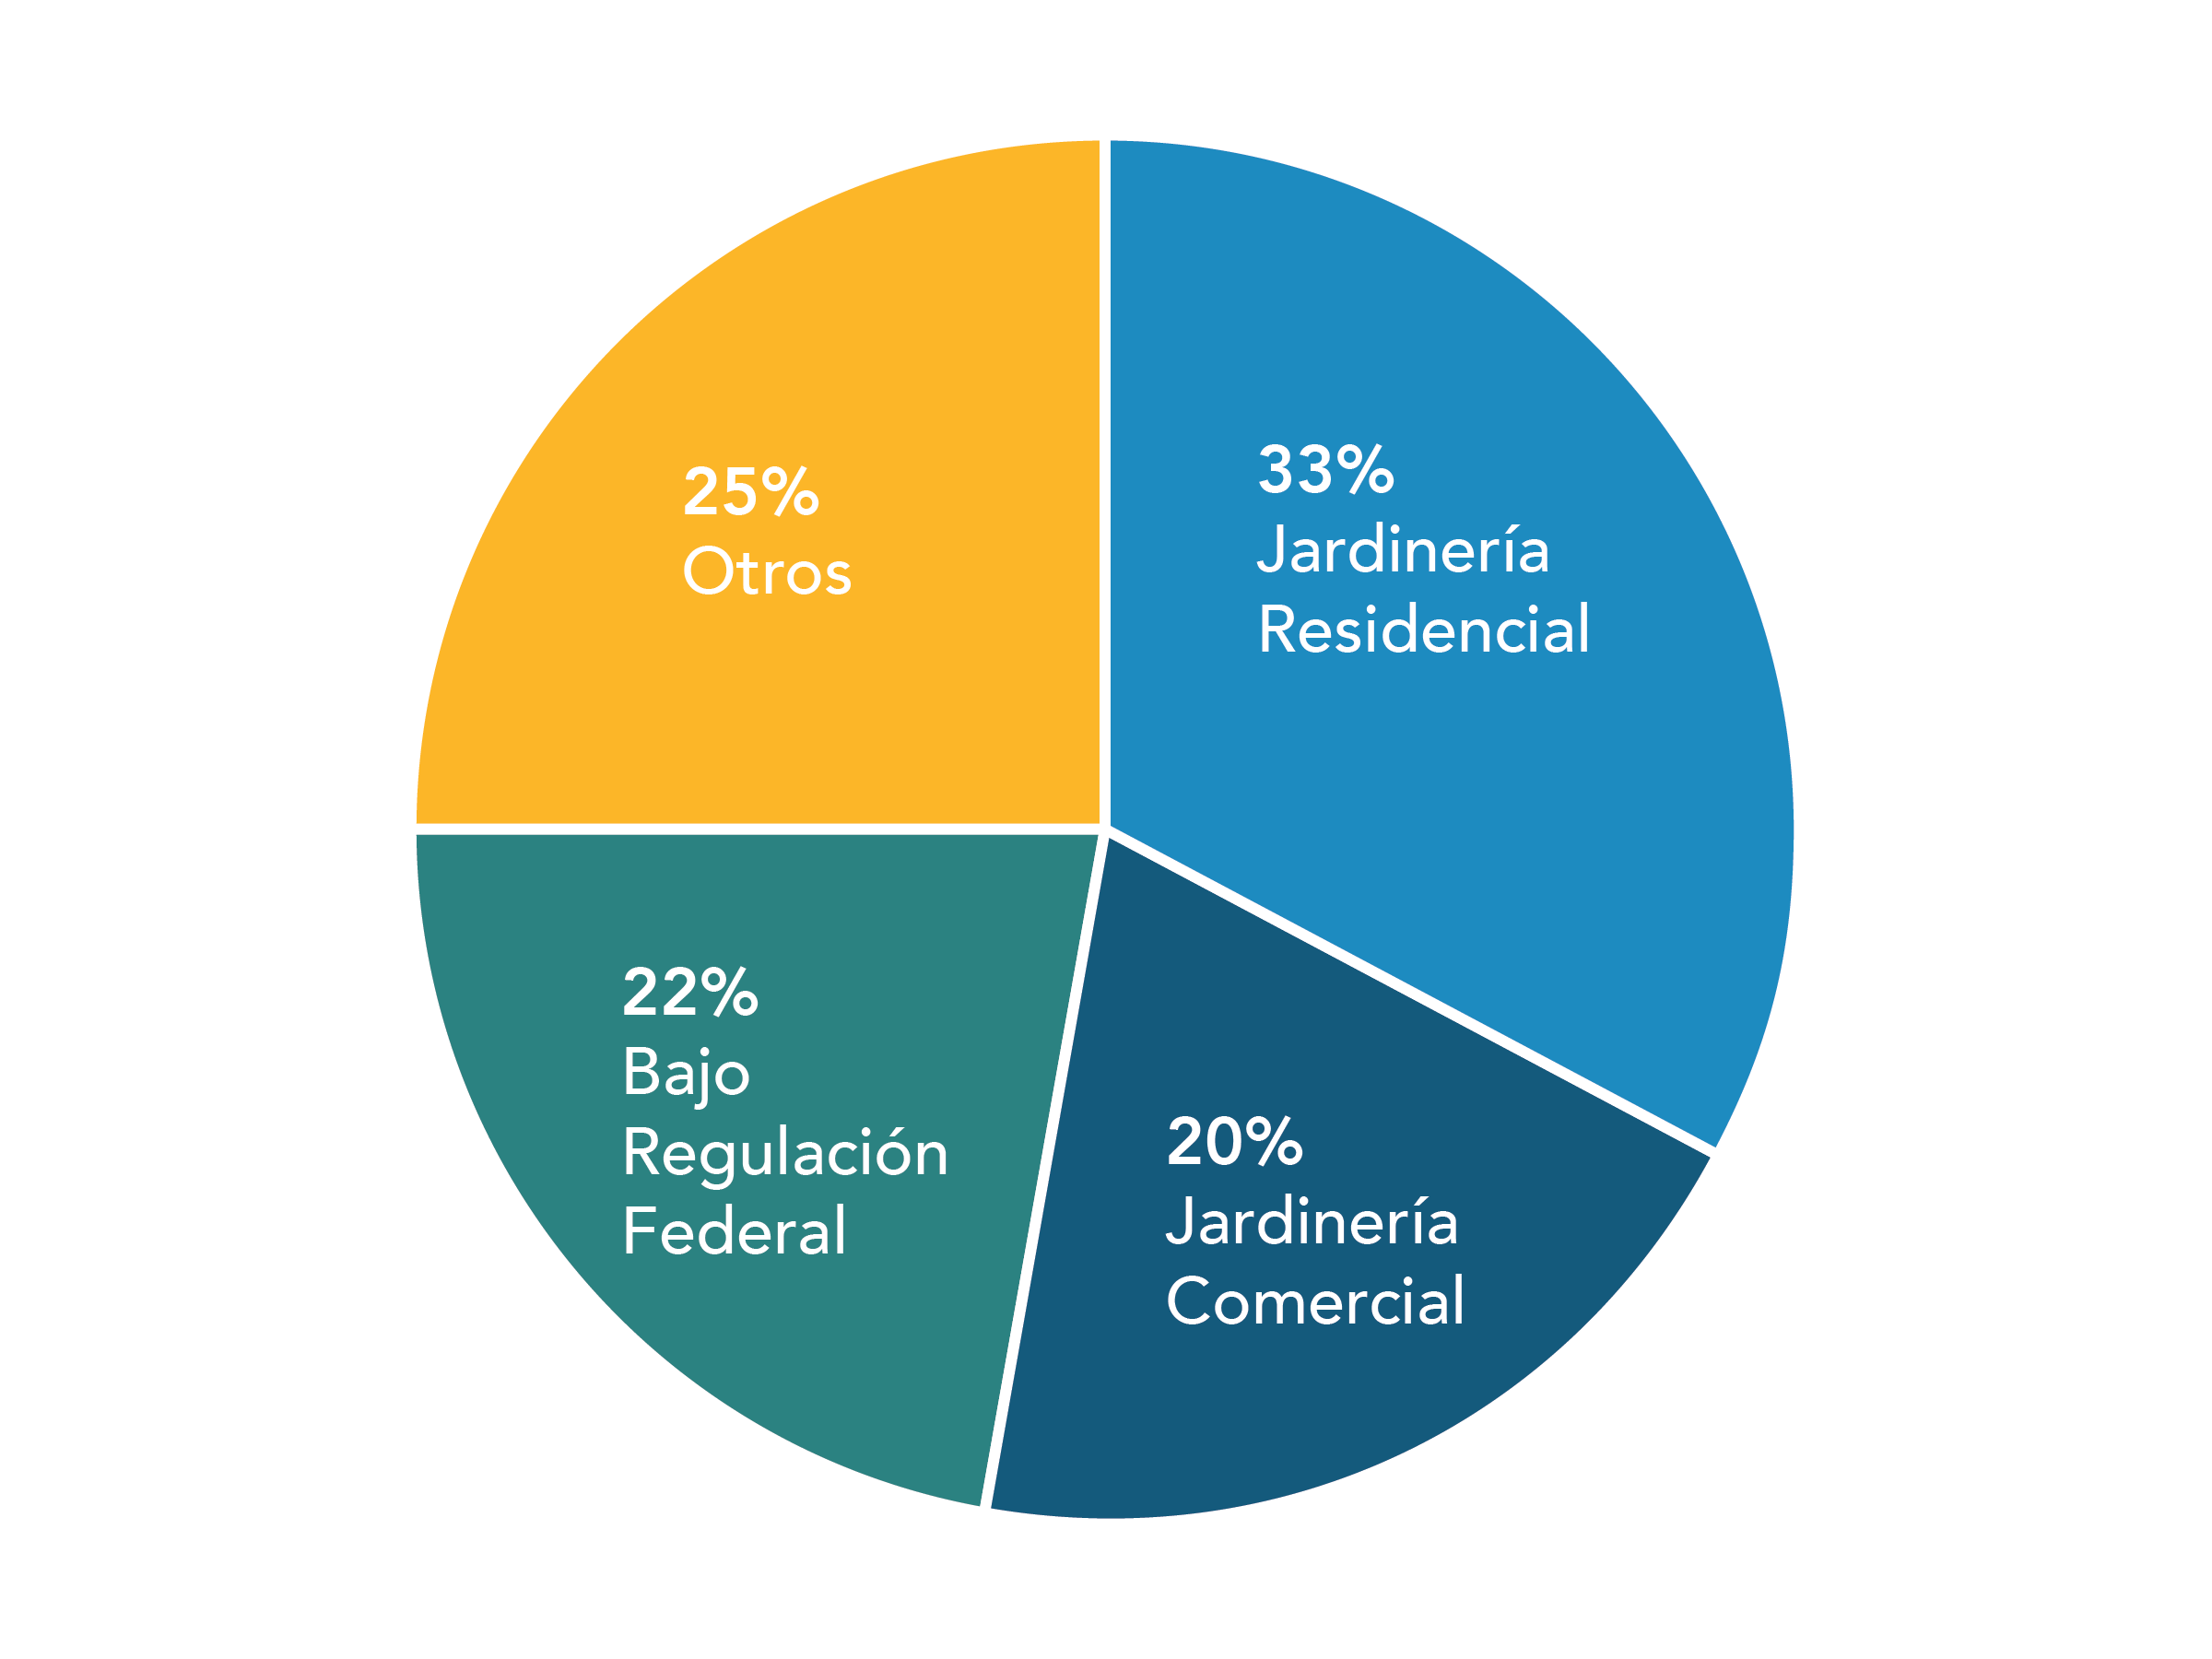 SORE Emissions by Type pie chart.  33% of sore emissions are made by residential lawn and garden.  20% of sore emissions are made by commercial lawn and garden equipment.  22% of SORE emissions are from federally regulated equipment.  25% of SORE emissions are from other equipment. 